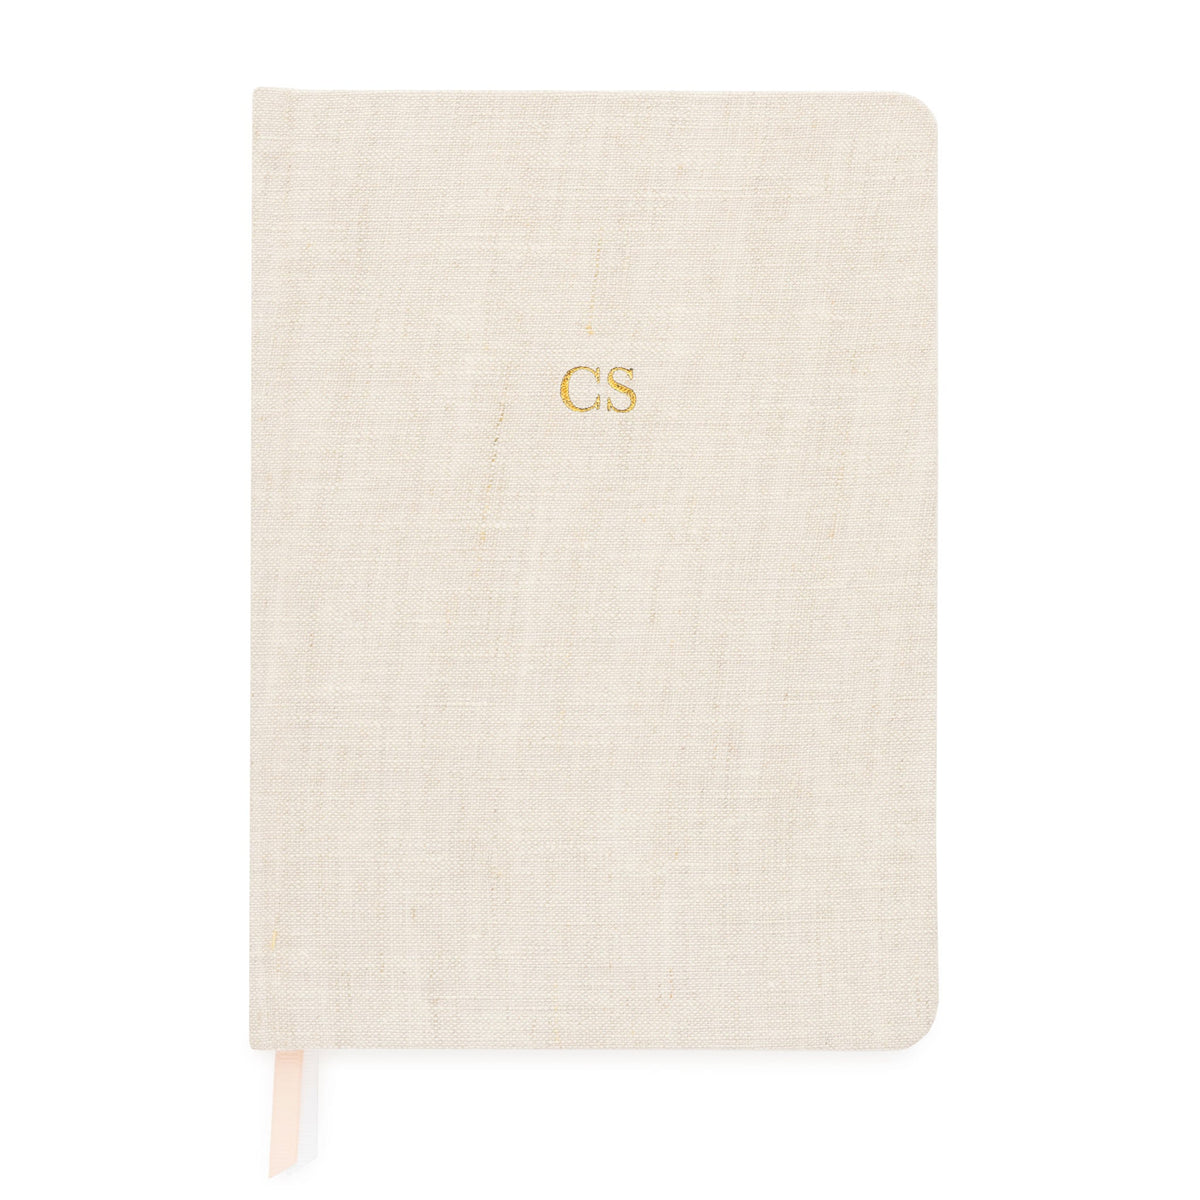 flax journal with gold foil monogram